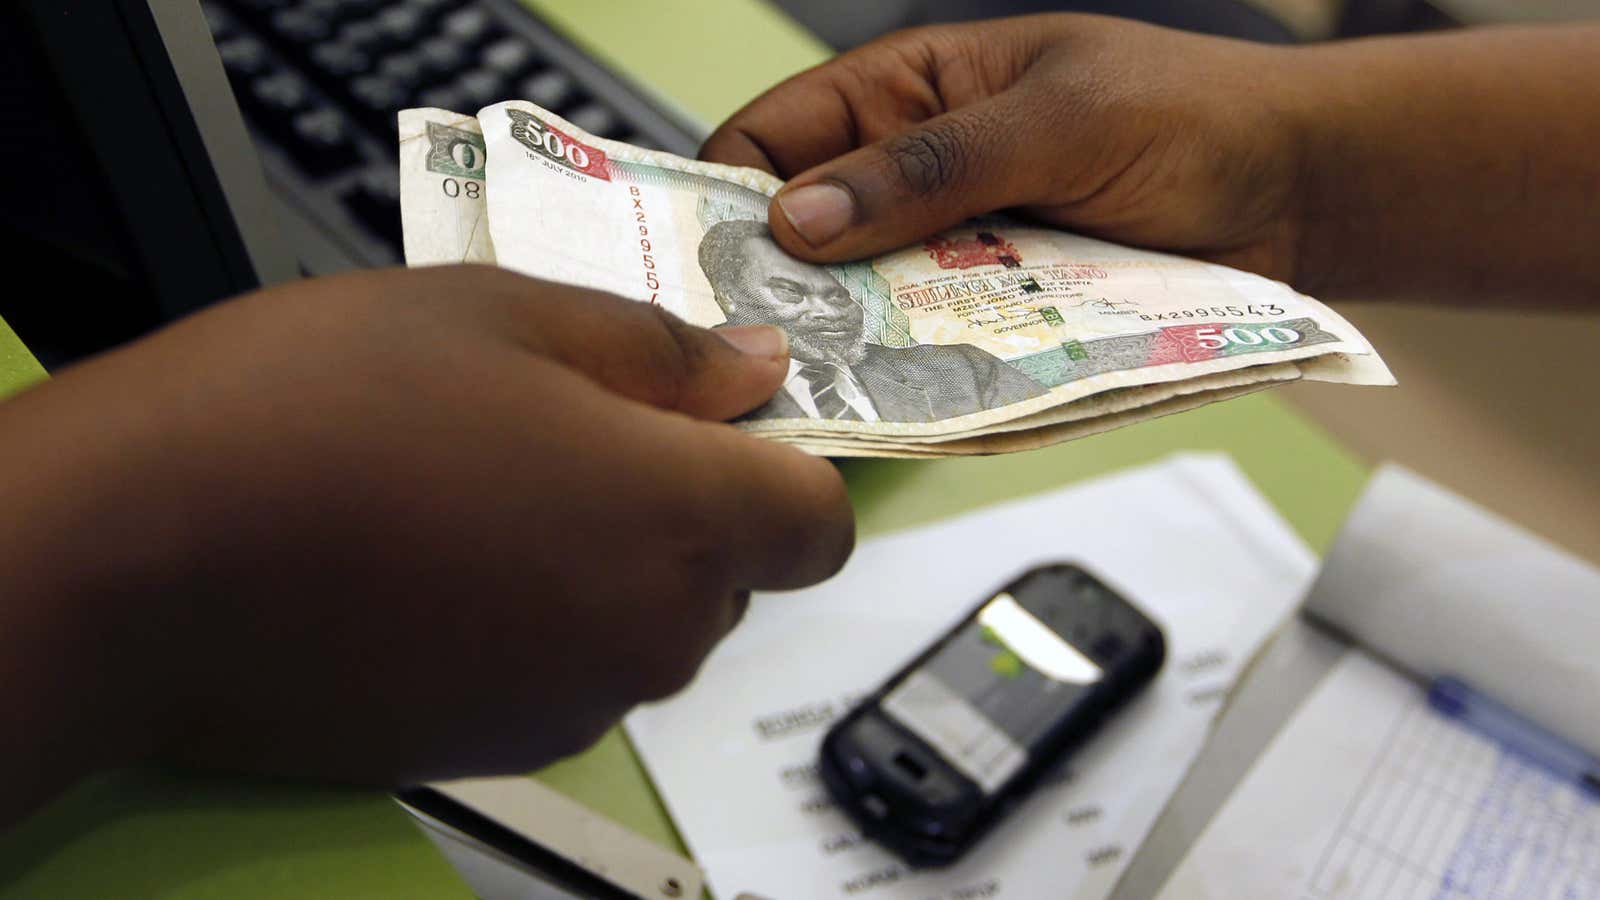 Mobile money giant M-Pesa is getting its own debit card to compete with banks